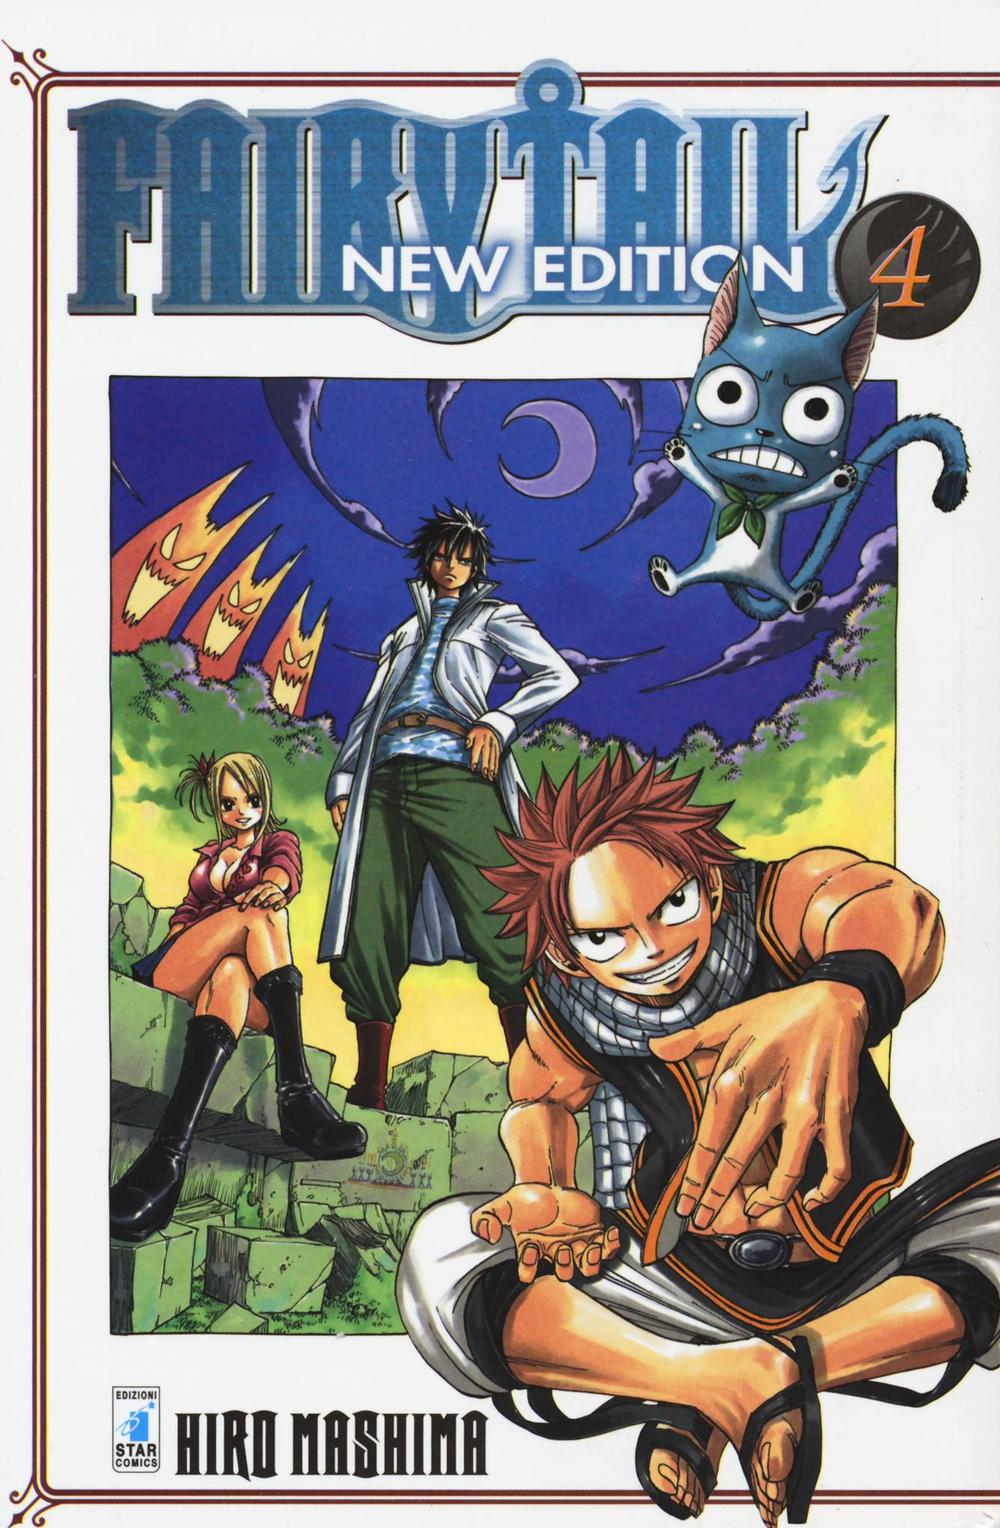 Fairy Tail. New edition. Vol. 4